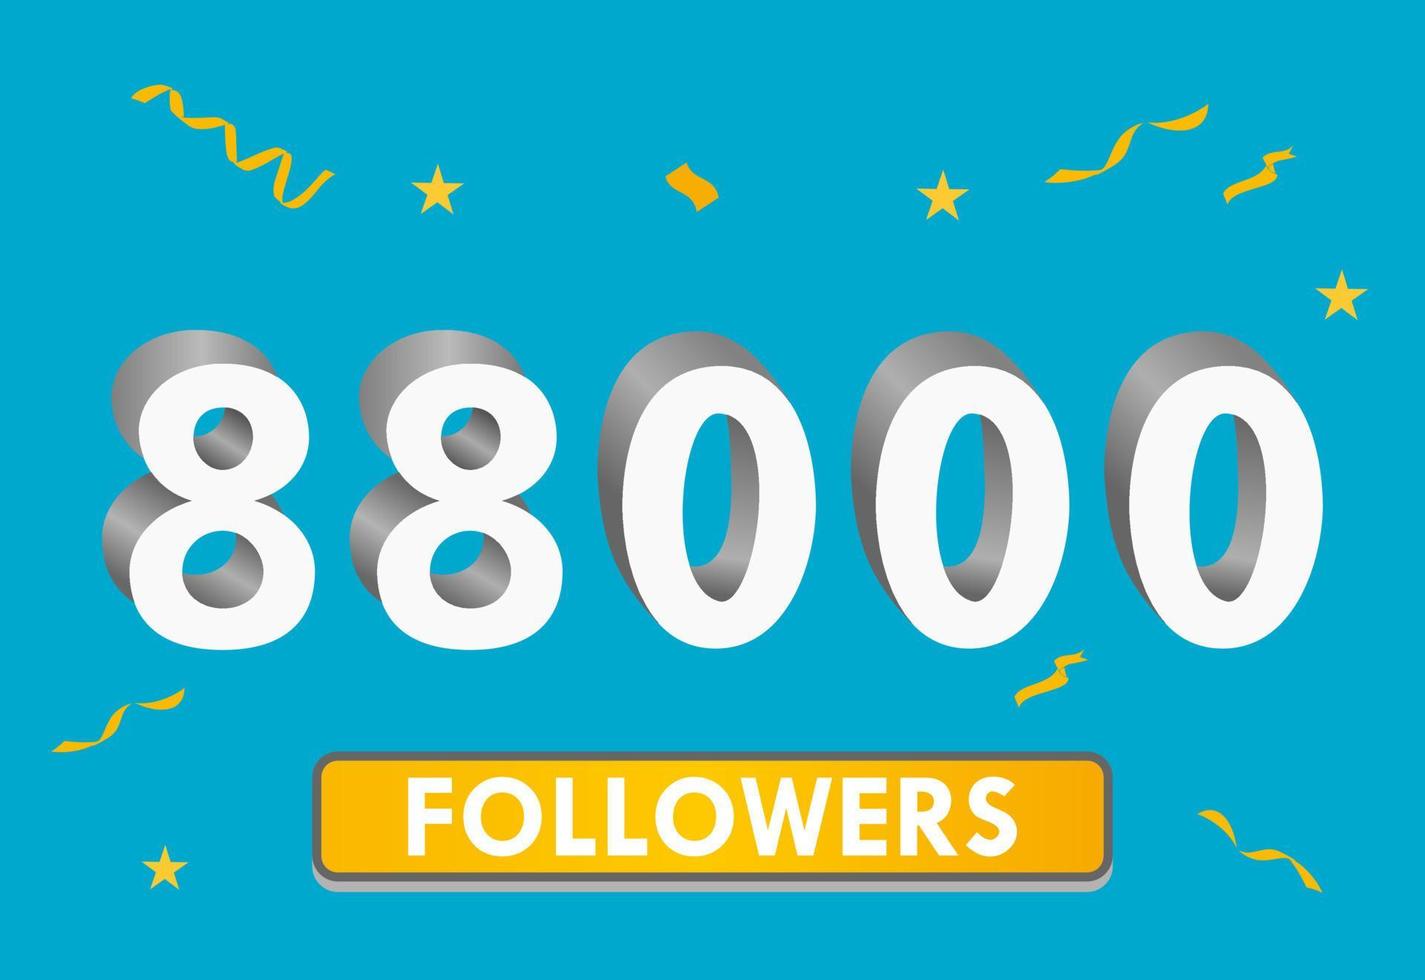 Illustration 3d numbers for social media 88k likes thanks, celebrating subscribers fans. Banner with 88000 followers vector